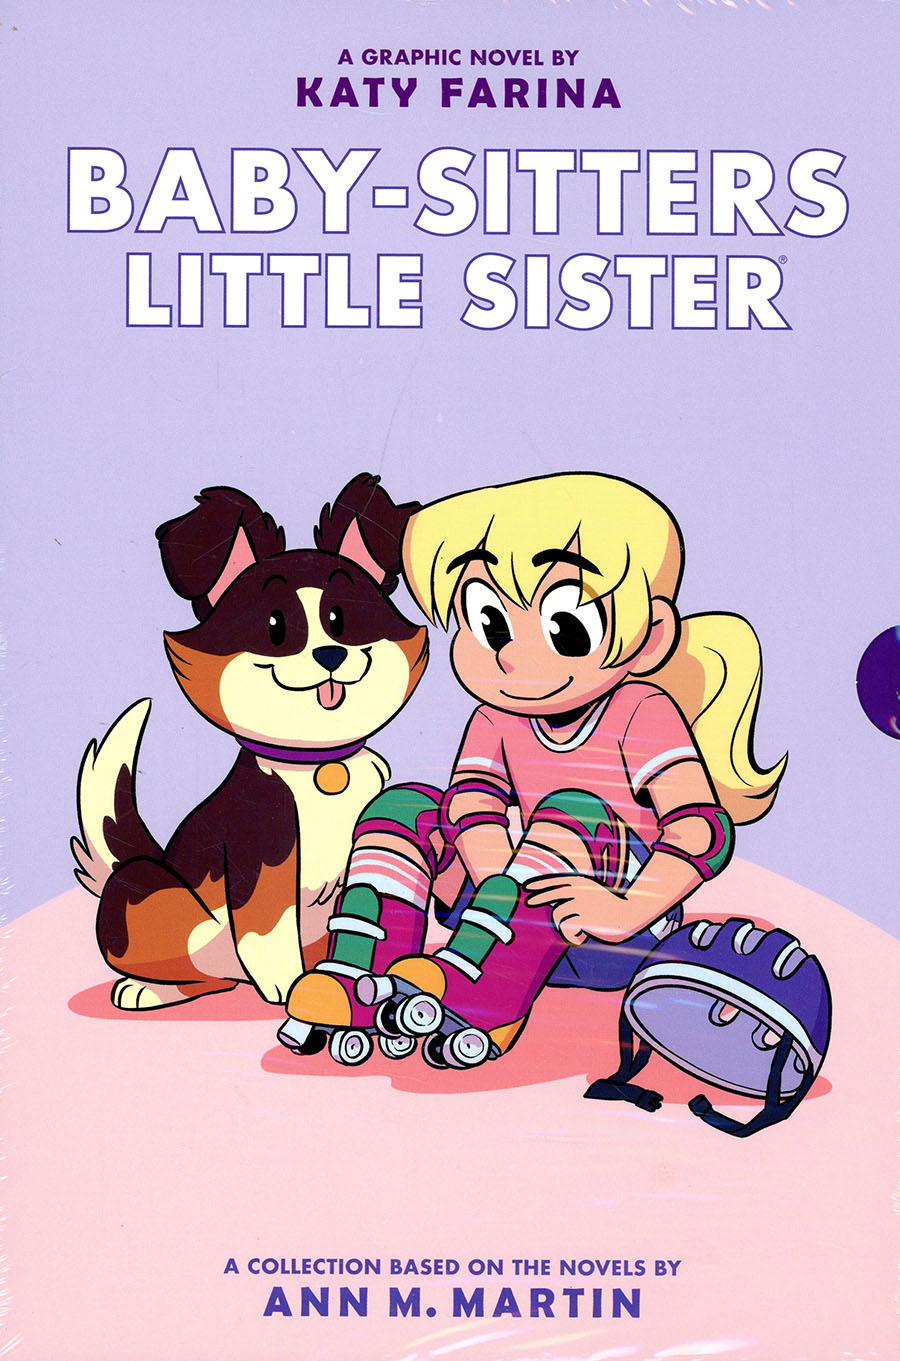 Baby-Sitters Little Sister Boxed Set #1 Vol 1-4